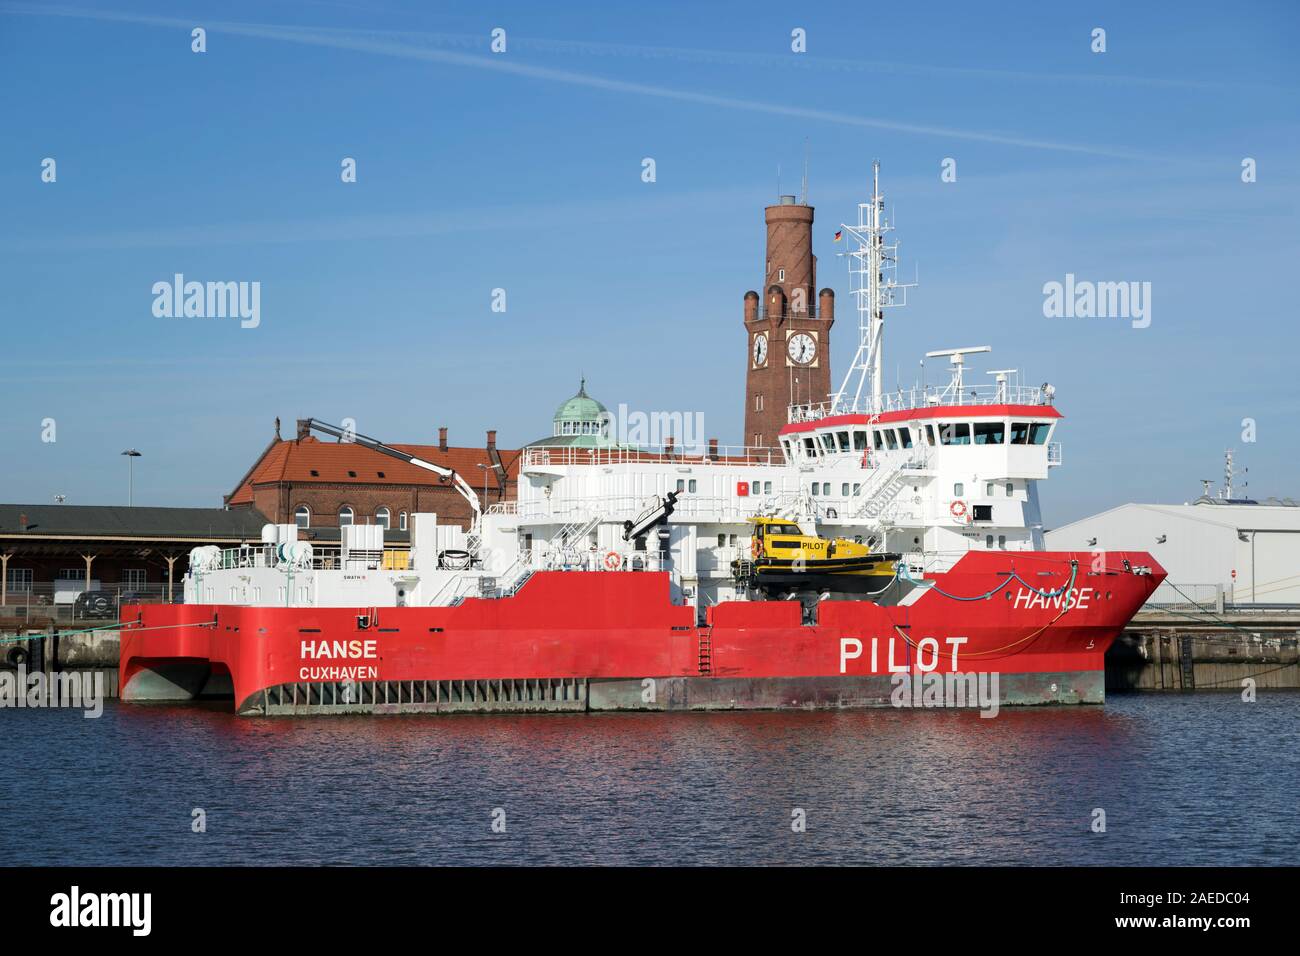 pilot station boat HANSE in the port of Cuxhaven Stock Photo